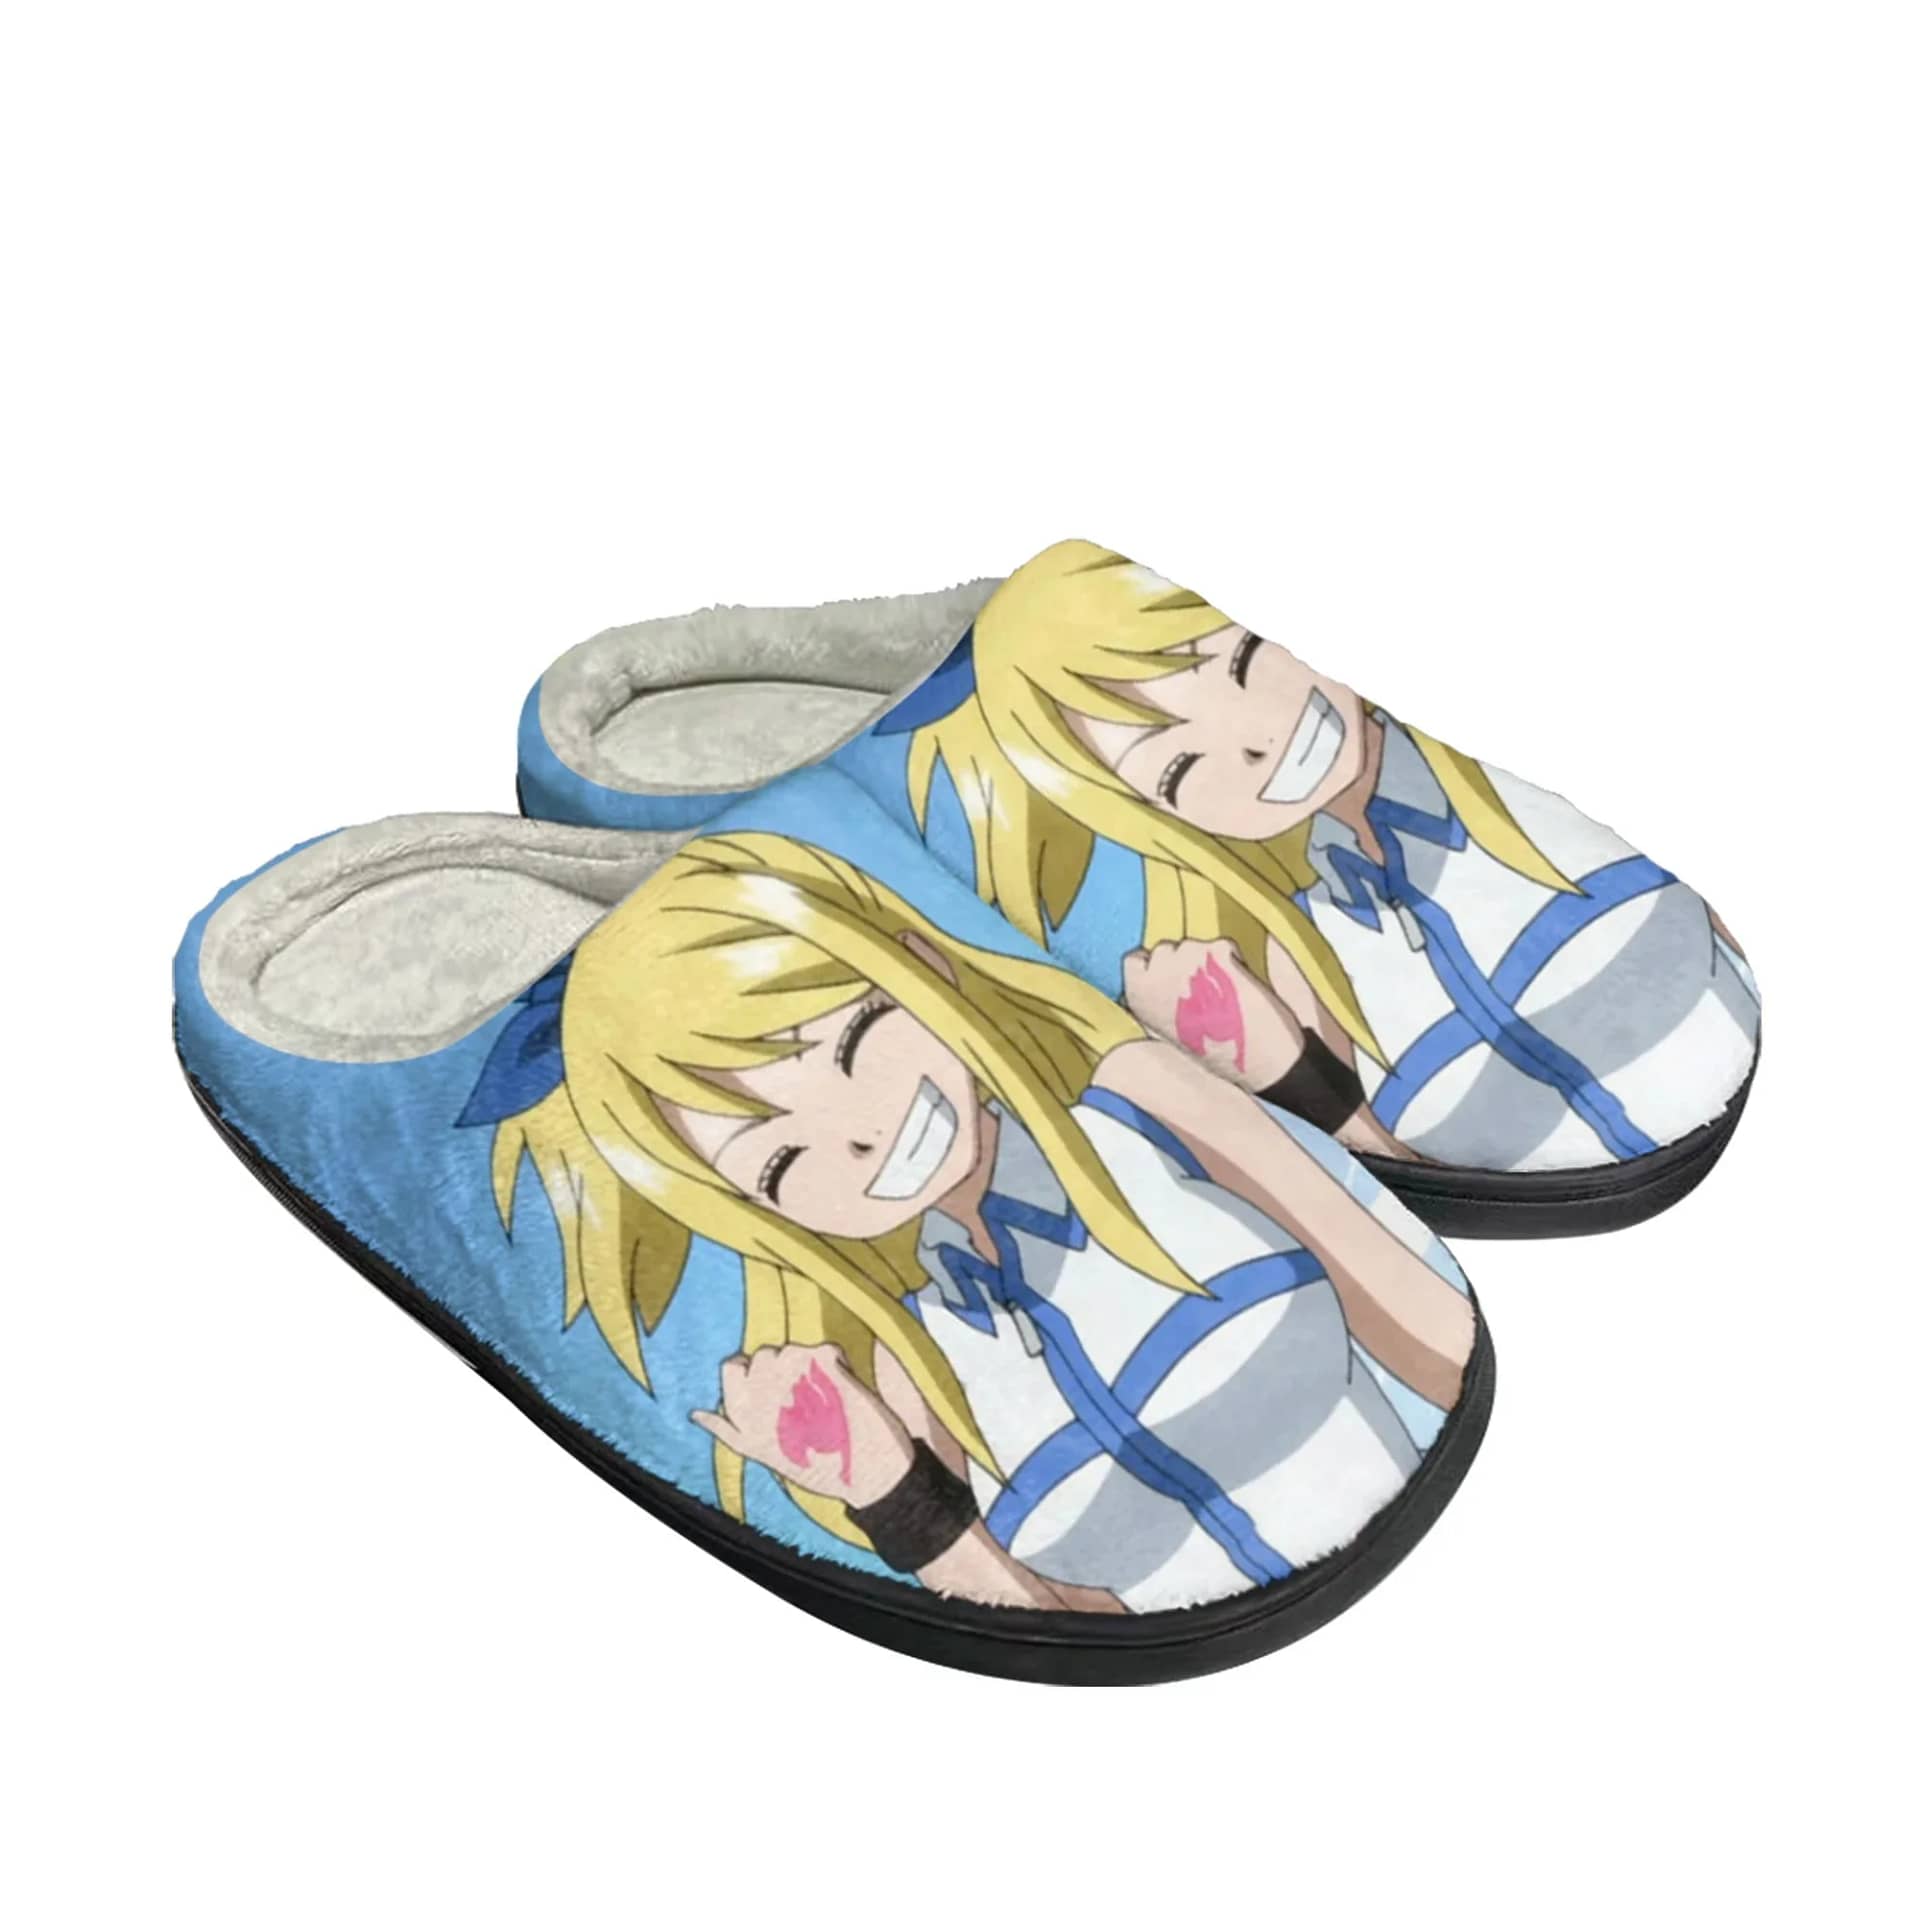 Lucy Heartfilia Anime Fairy Tail Shoes Slippers